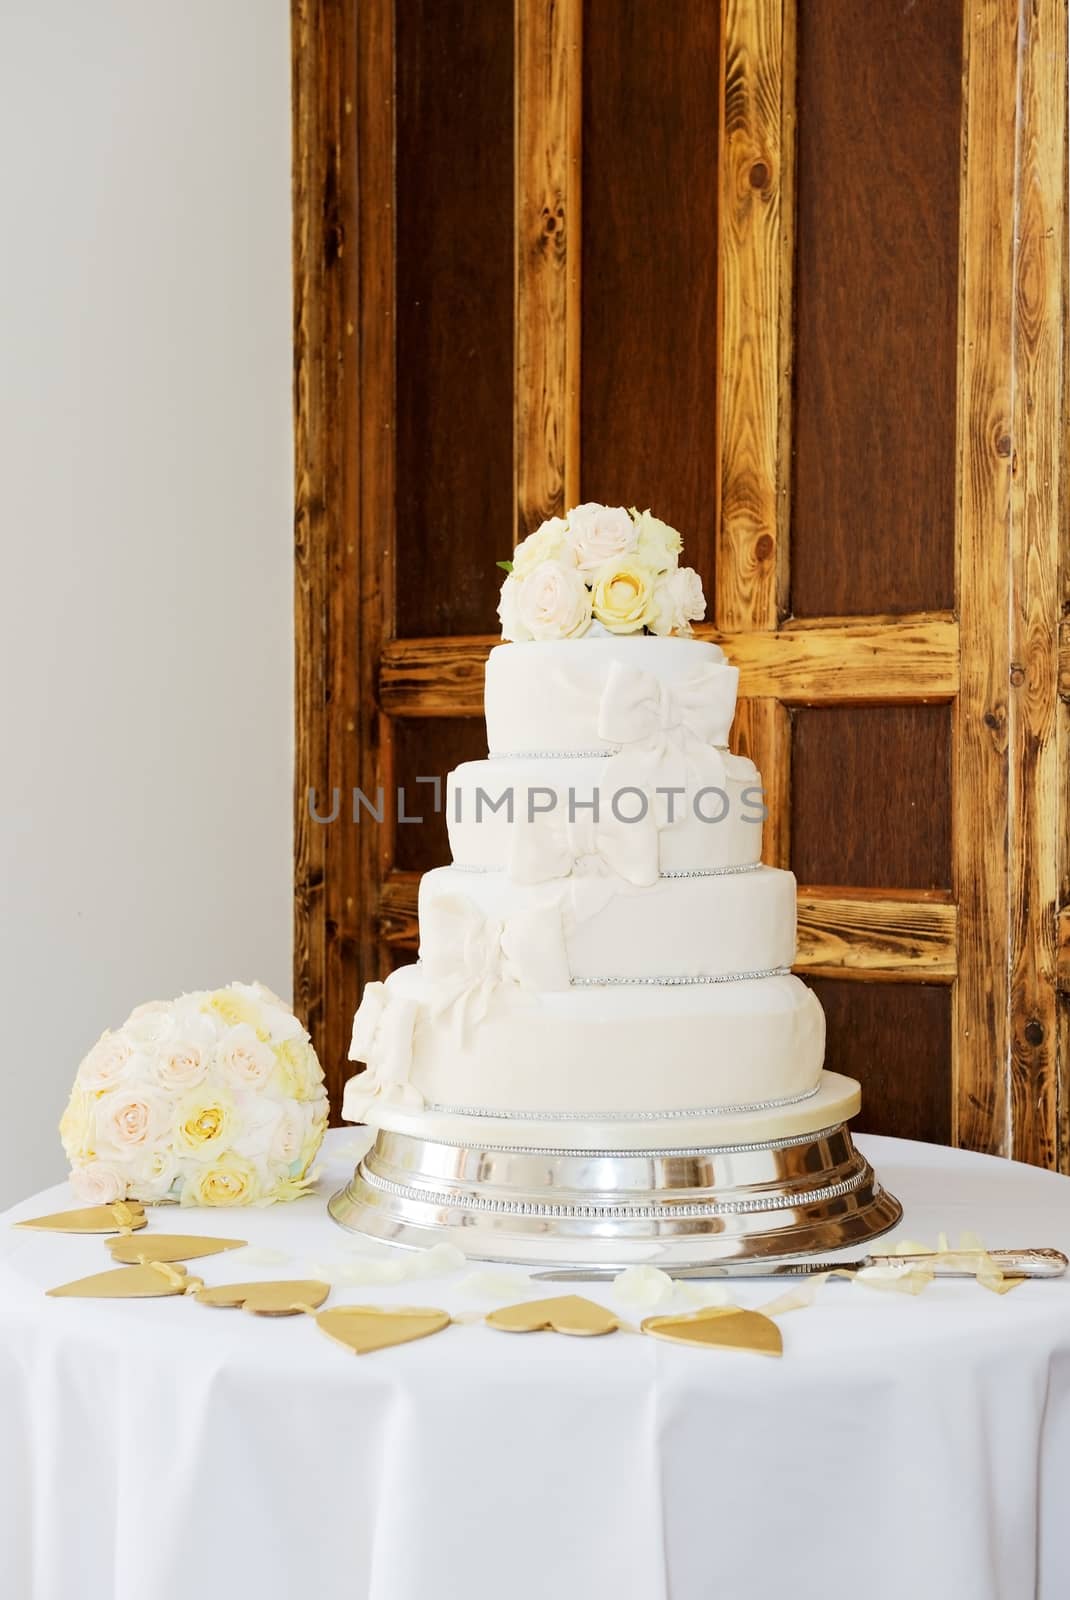 Wedding cake and bouquet by kmwphotography